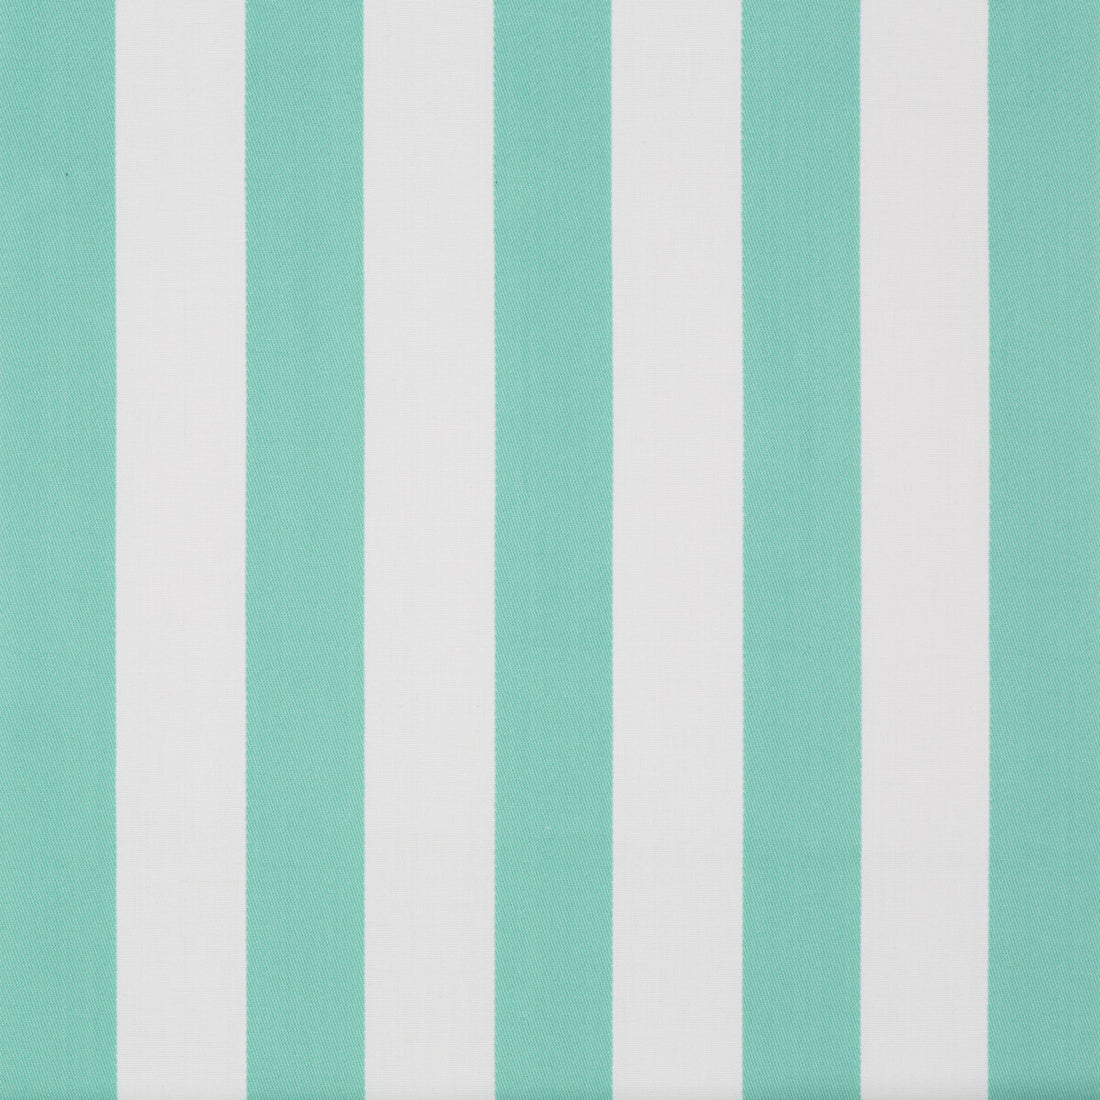 Surf Stripe fabric in shorely blue color - pattern 2016117.113.0 - by Lee Jofa in the Lilly Pulitzer II collection